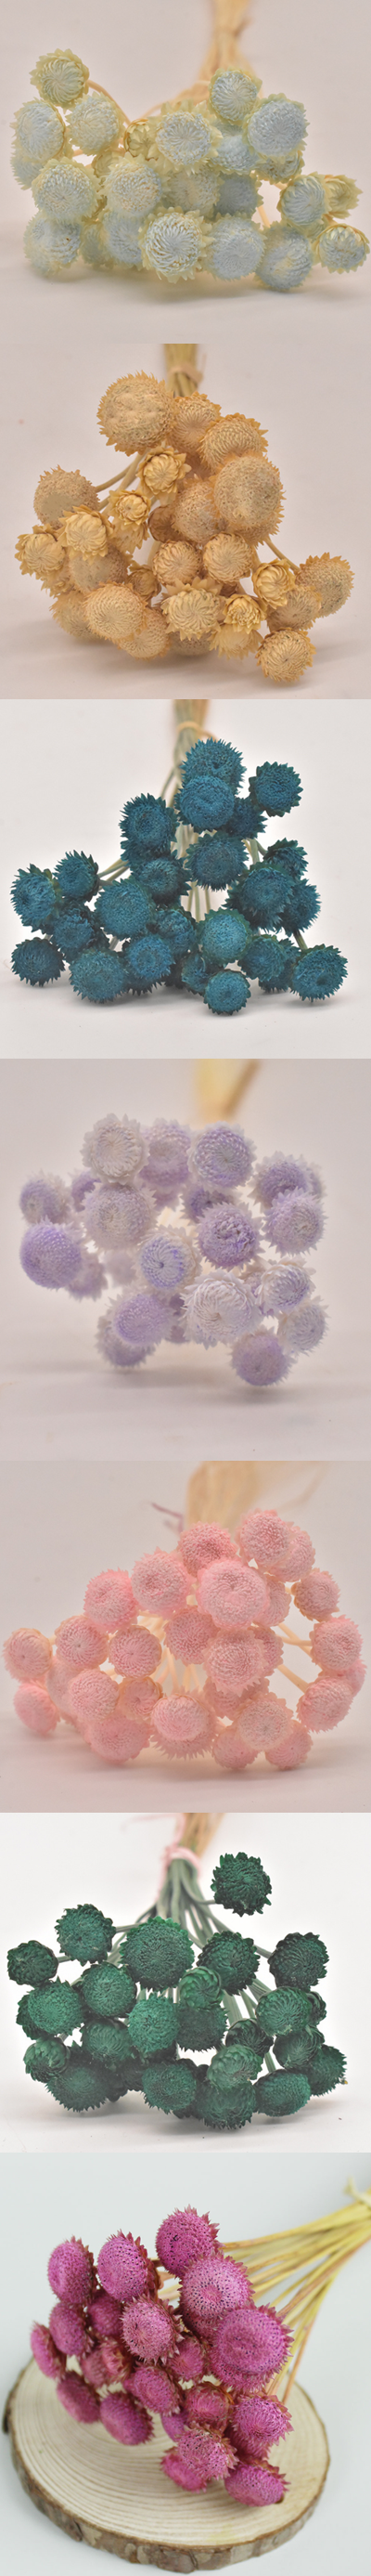 Preserved Dried Flower